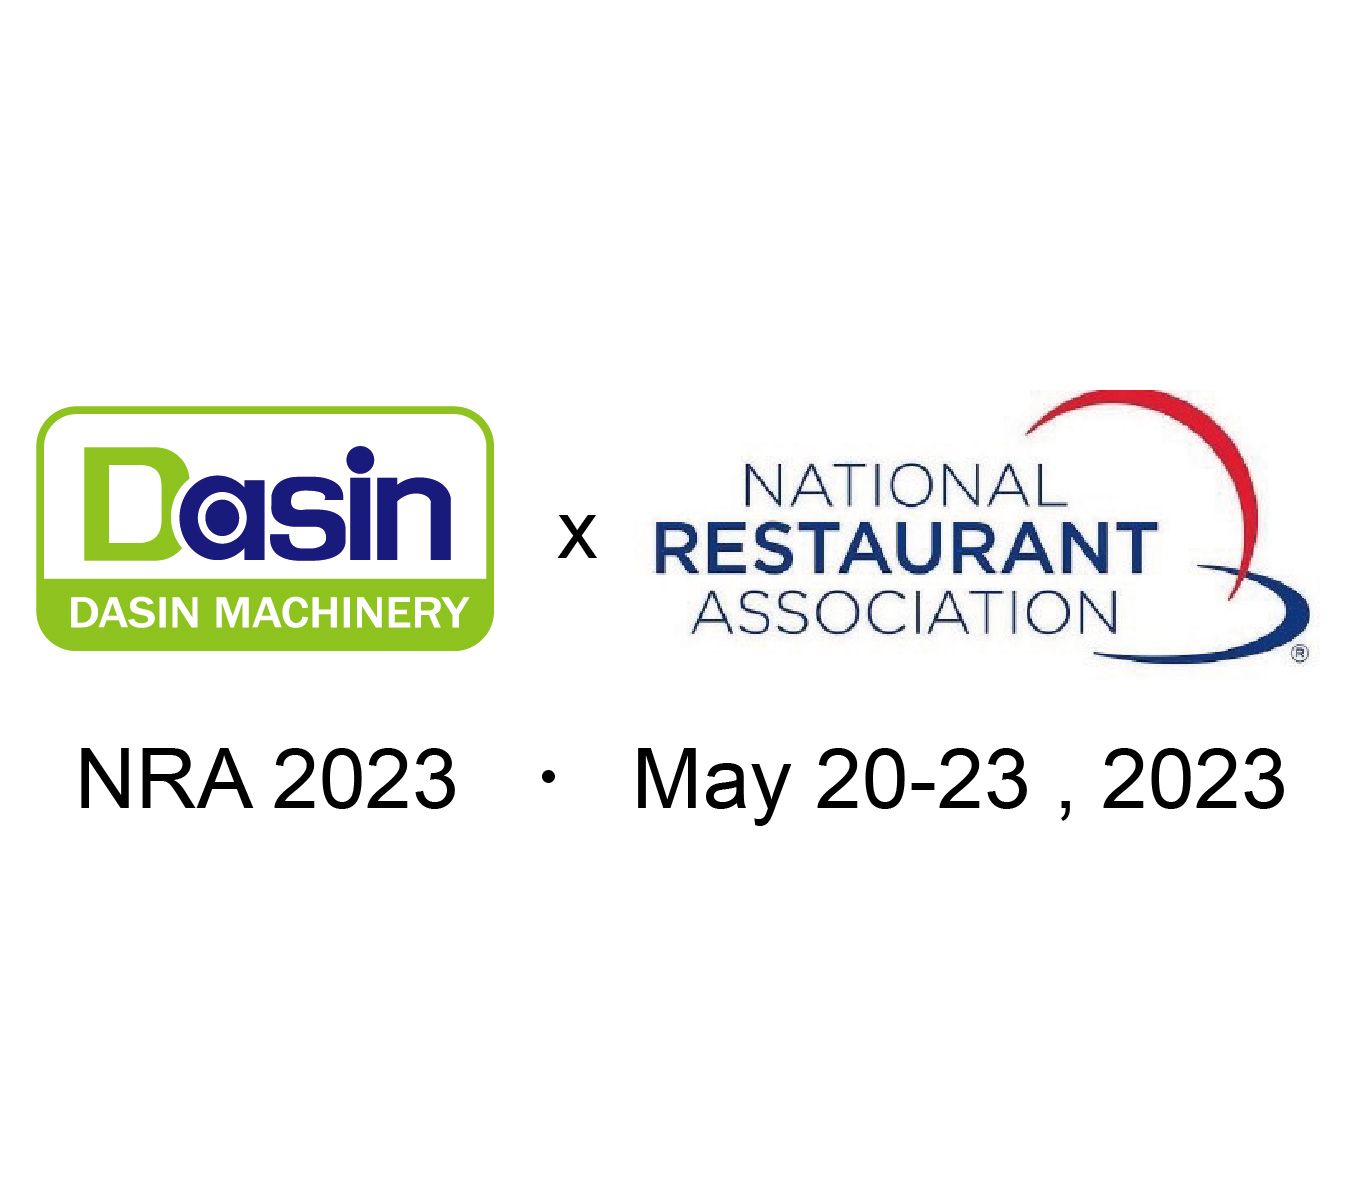 Dasin Machinery Co., Ltd will be on 2023 NRA show